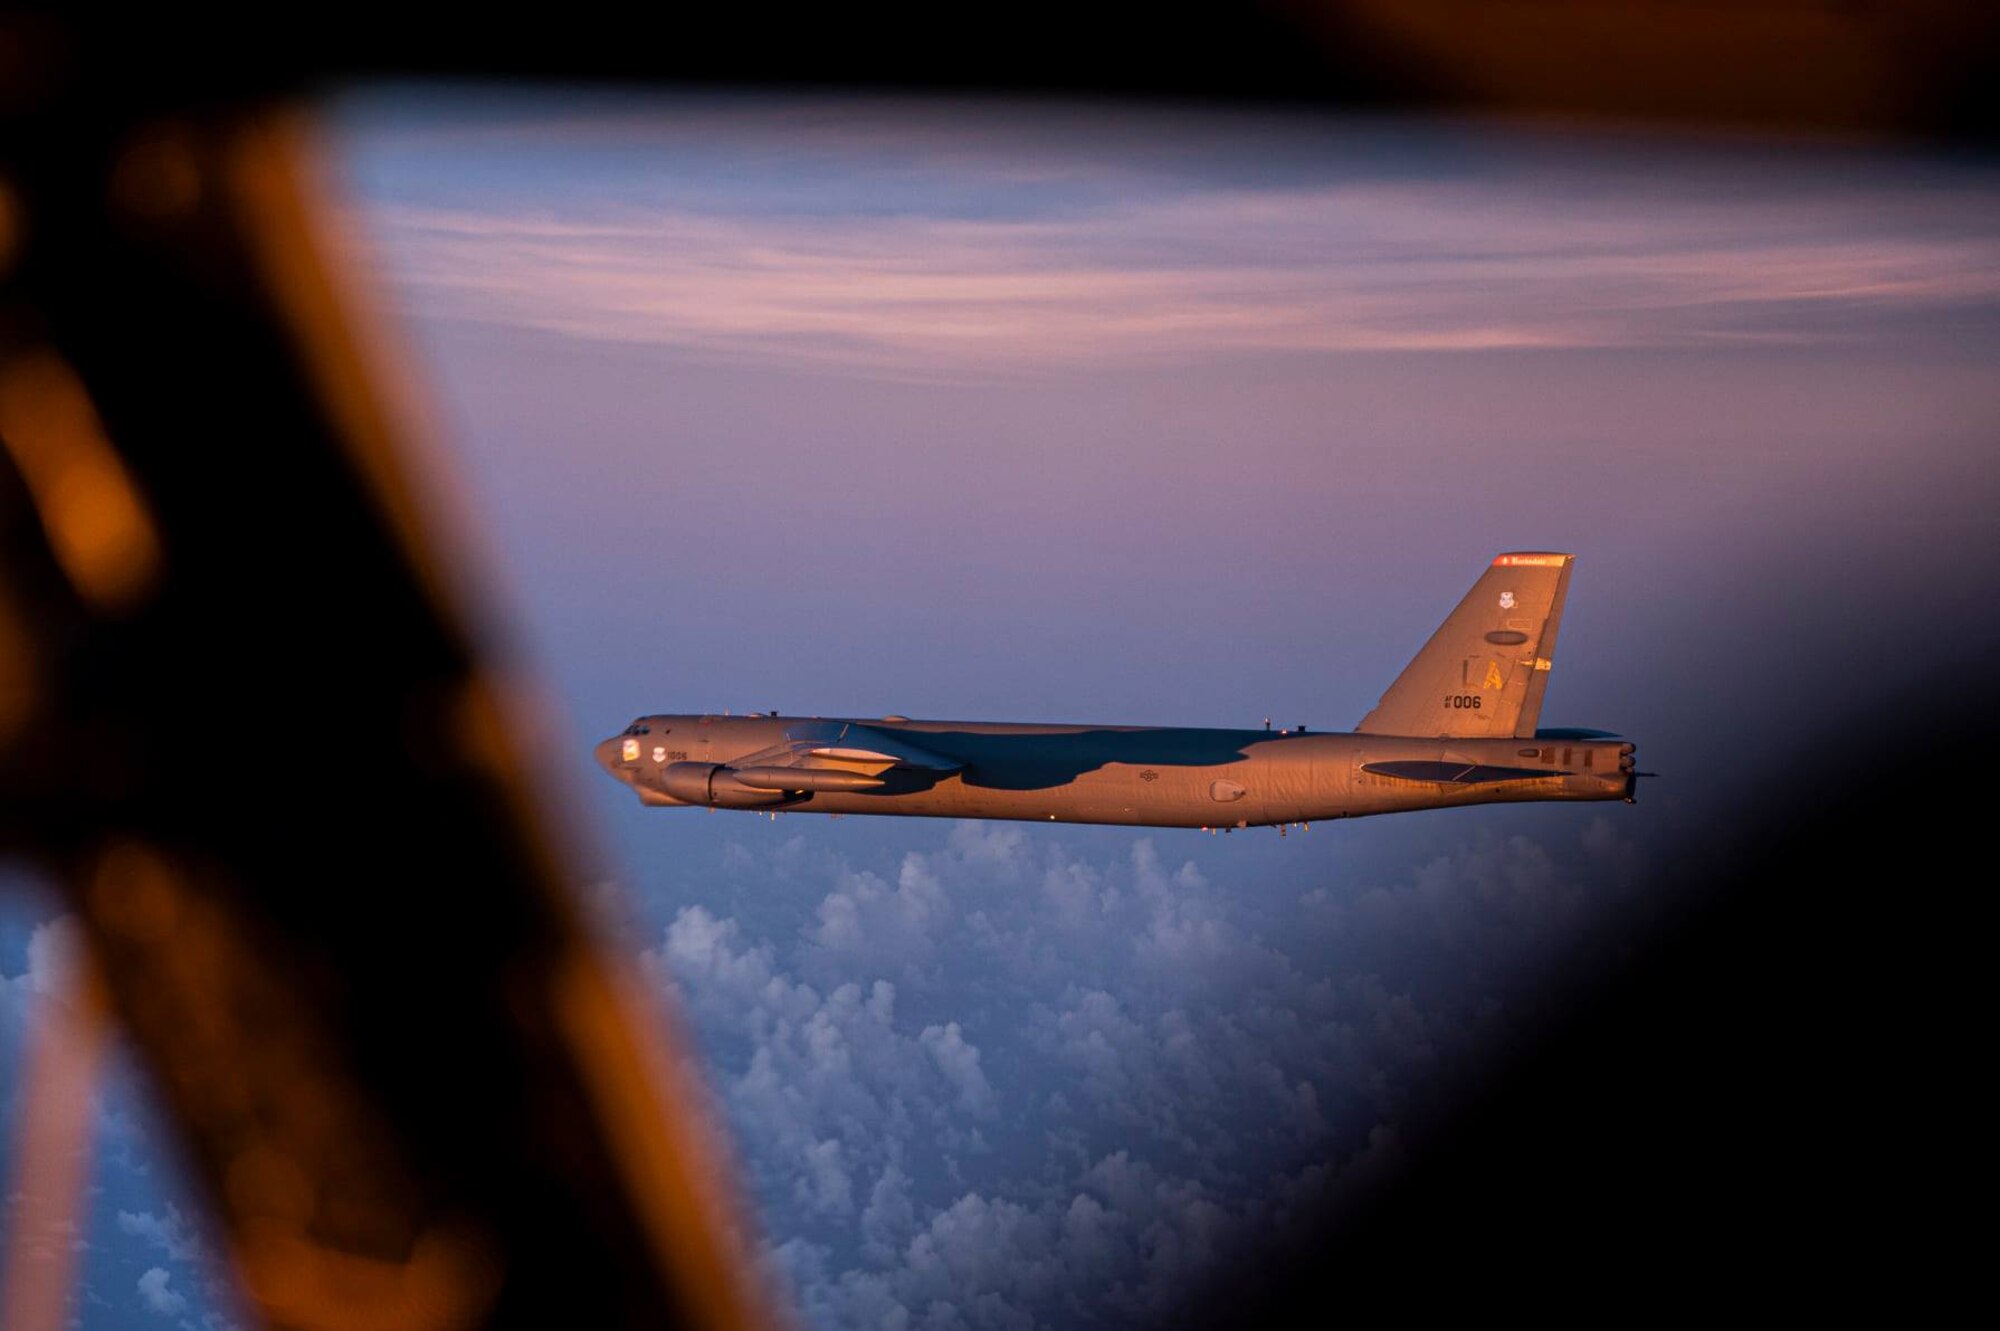 A U.S. Air Force B-52H Stratofortress, assigned to the 2nd Bomb Wing, Barksdale Air Force Base, Louisiana, returns to base after a Bomber Task Force Mission over the Indo-Pacific region, Sept. 9, 2021. This deployment allows aircrew and support personnel to conduct theater integration and to improve bomber interoperability with allies and partners. (U.S. Air Force photo by Staff Sgt. Devin M. Rumbaugh)